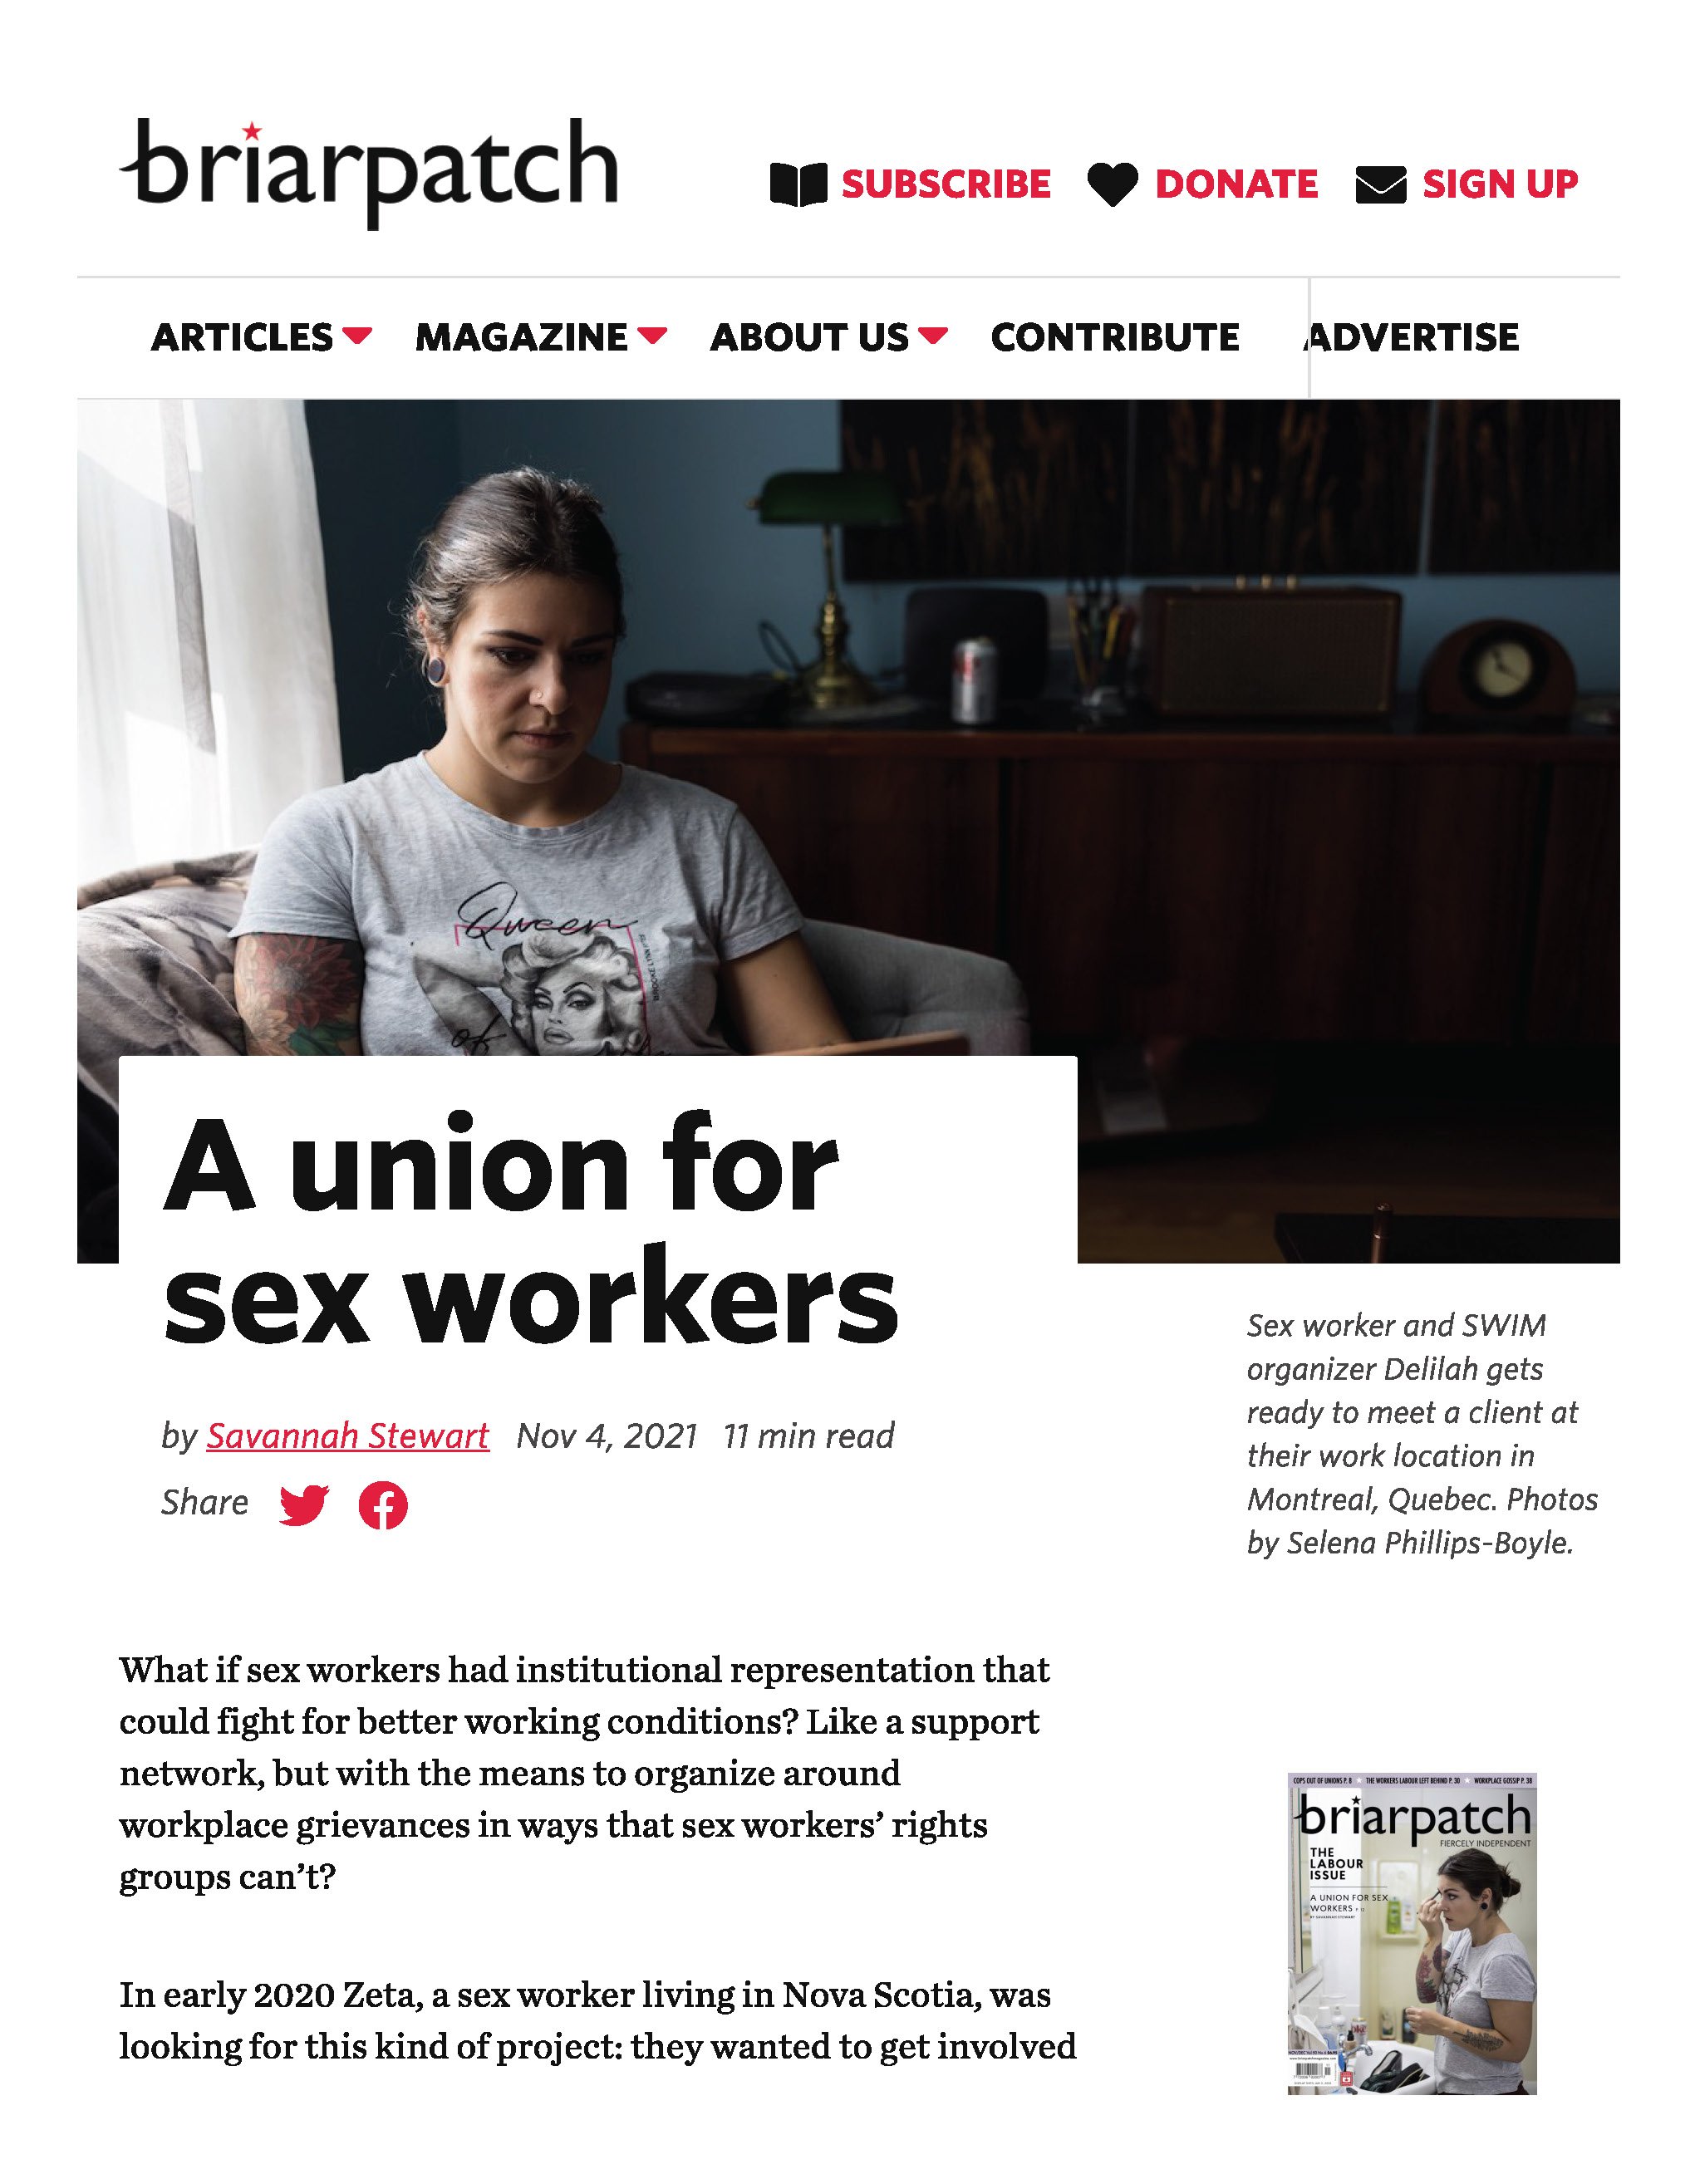 A union for sex workers